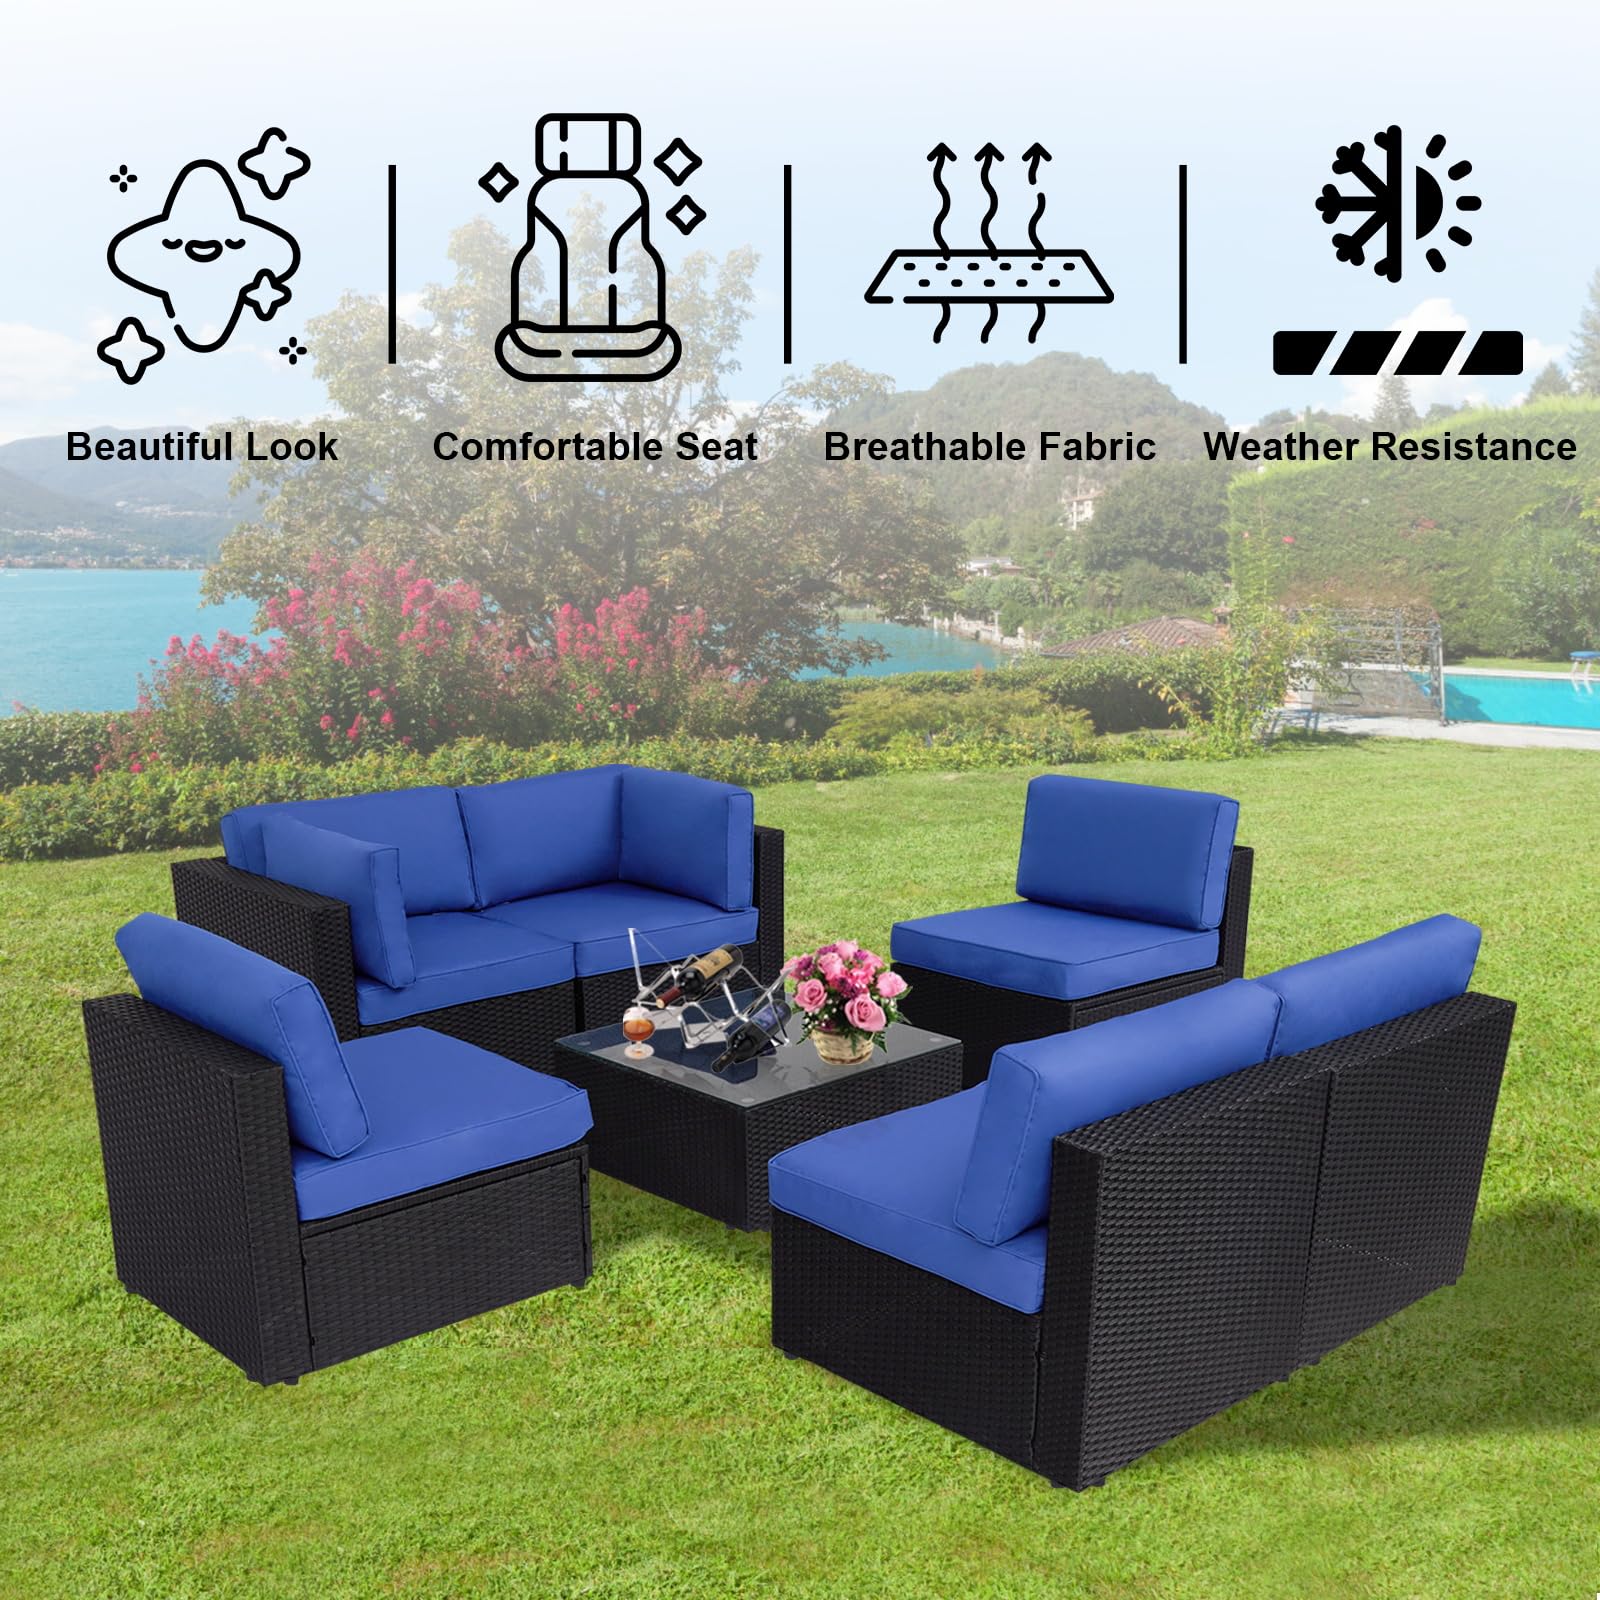 kinbor Patio Furniture - Outdoor Sectional Sofa, 7 Piece Wicker Outdoor Couch Rattan Conversation Set with Thickened Cushions and Glass Coffee Table